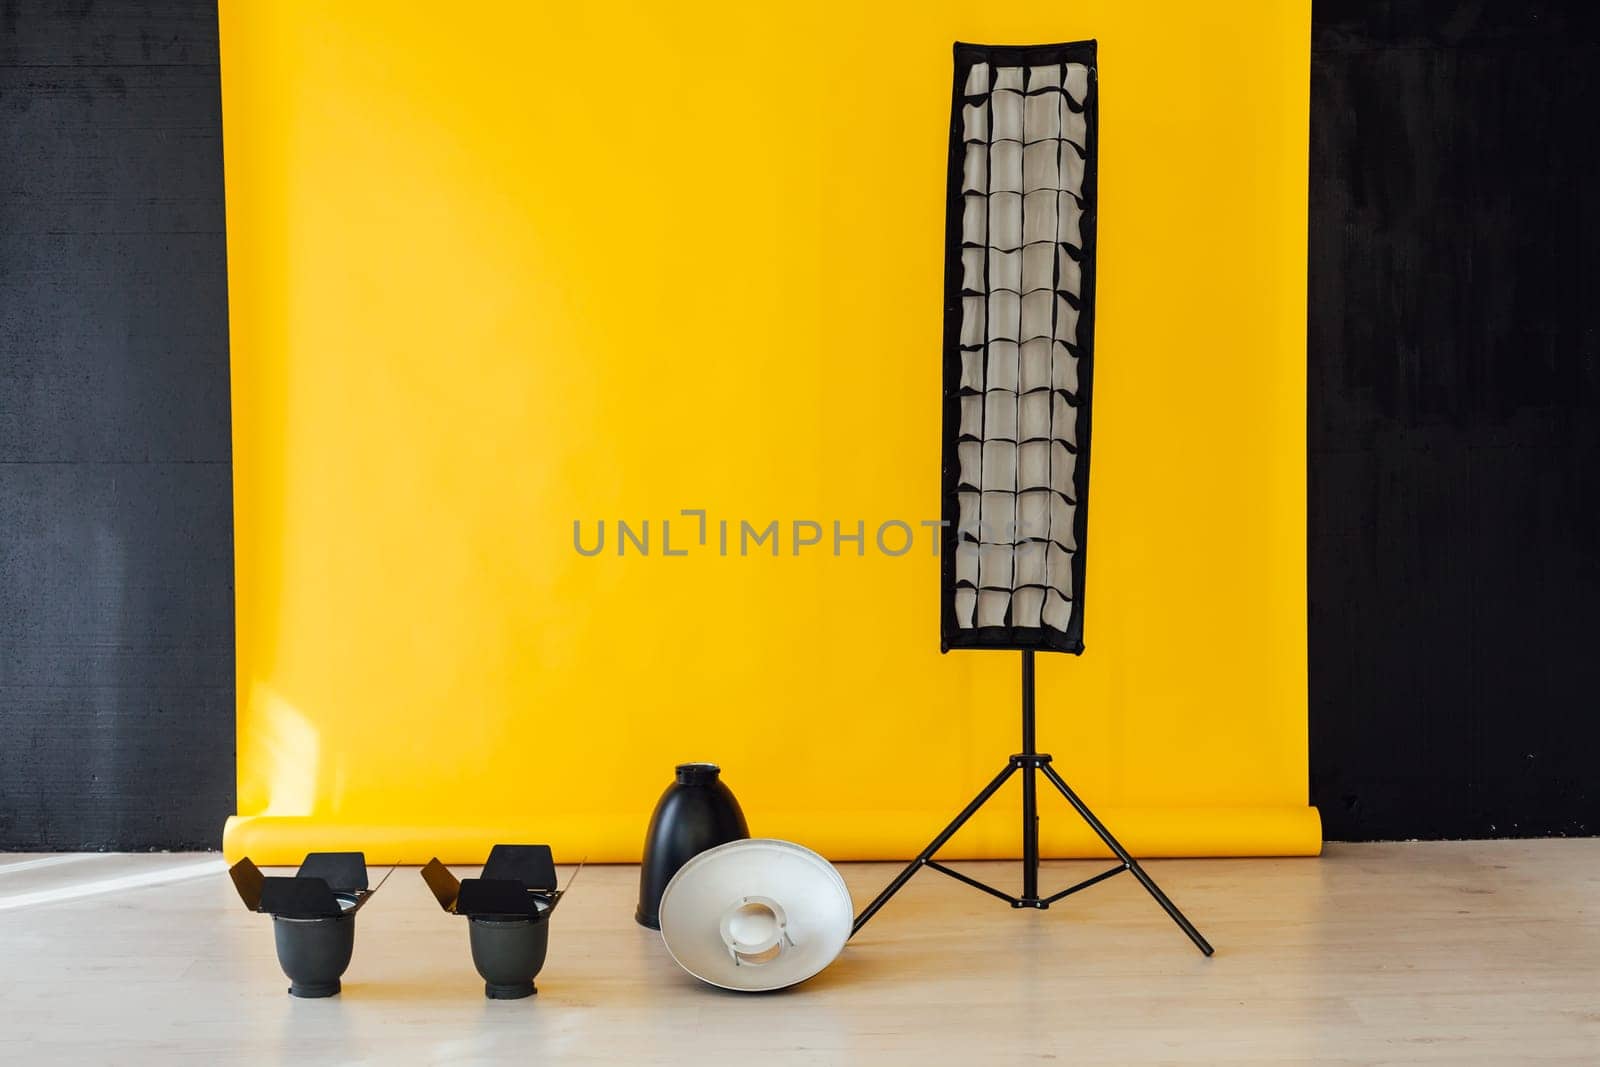 Flash equipment photo studio on yellow with black background by Simakov